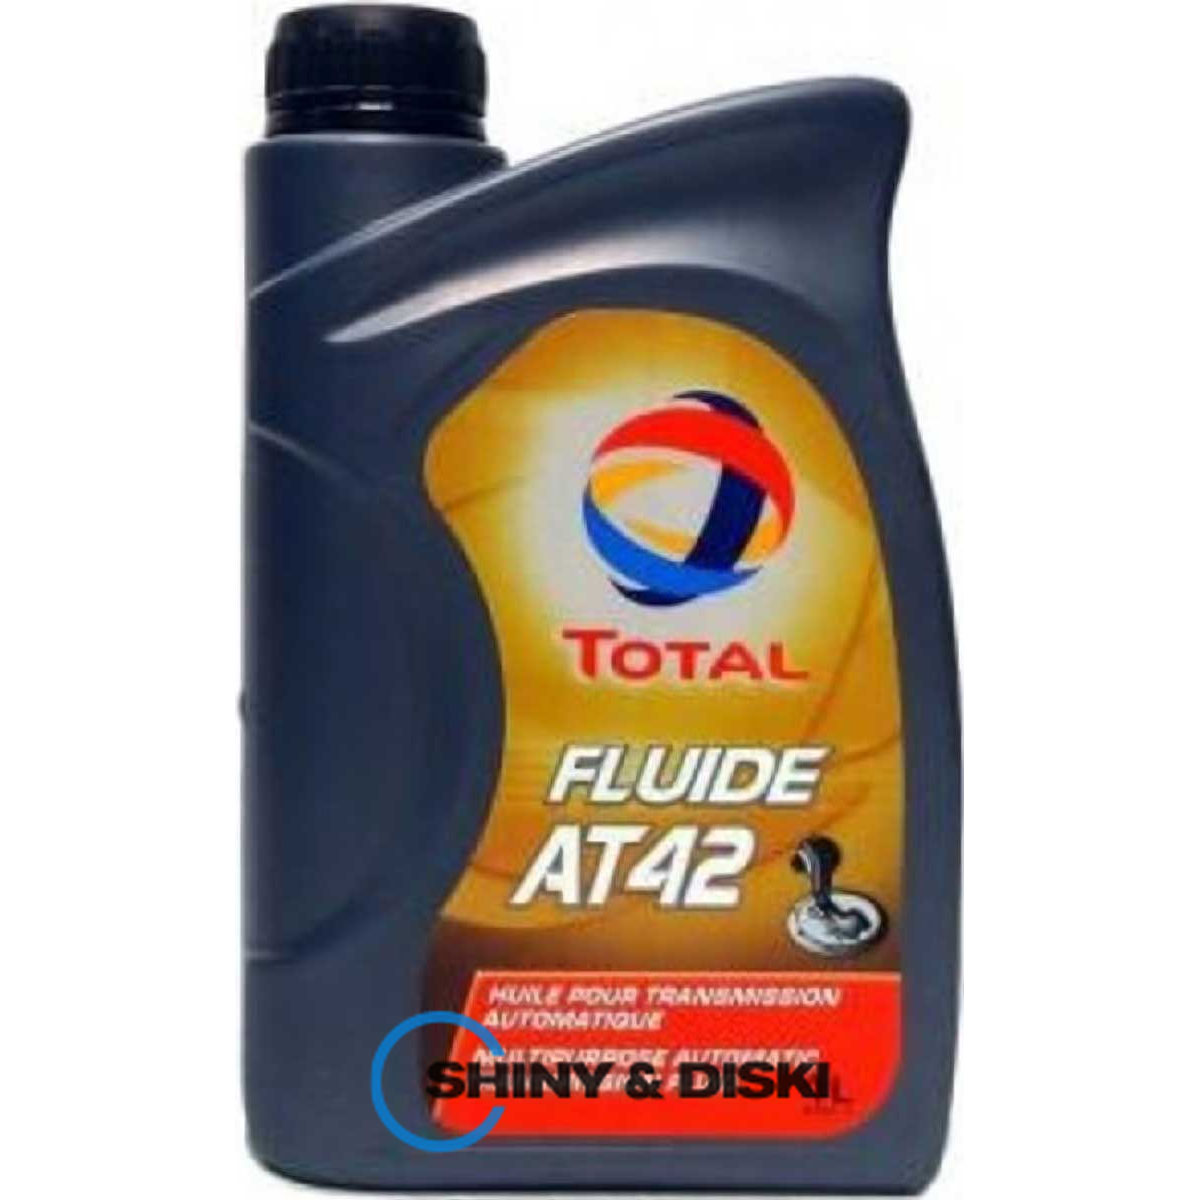 total fluide at42